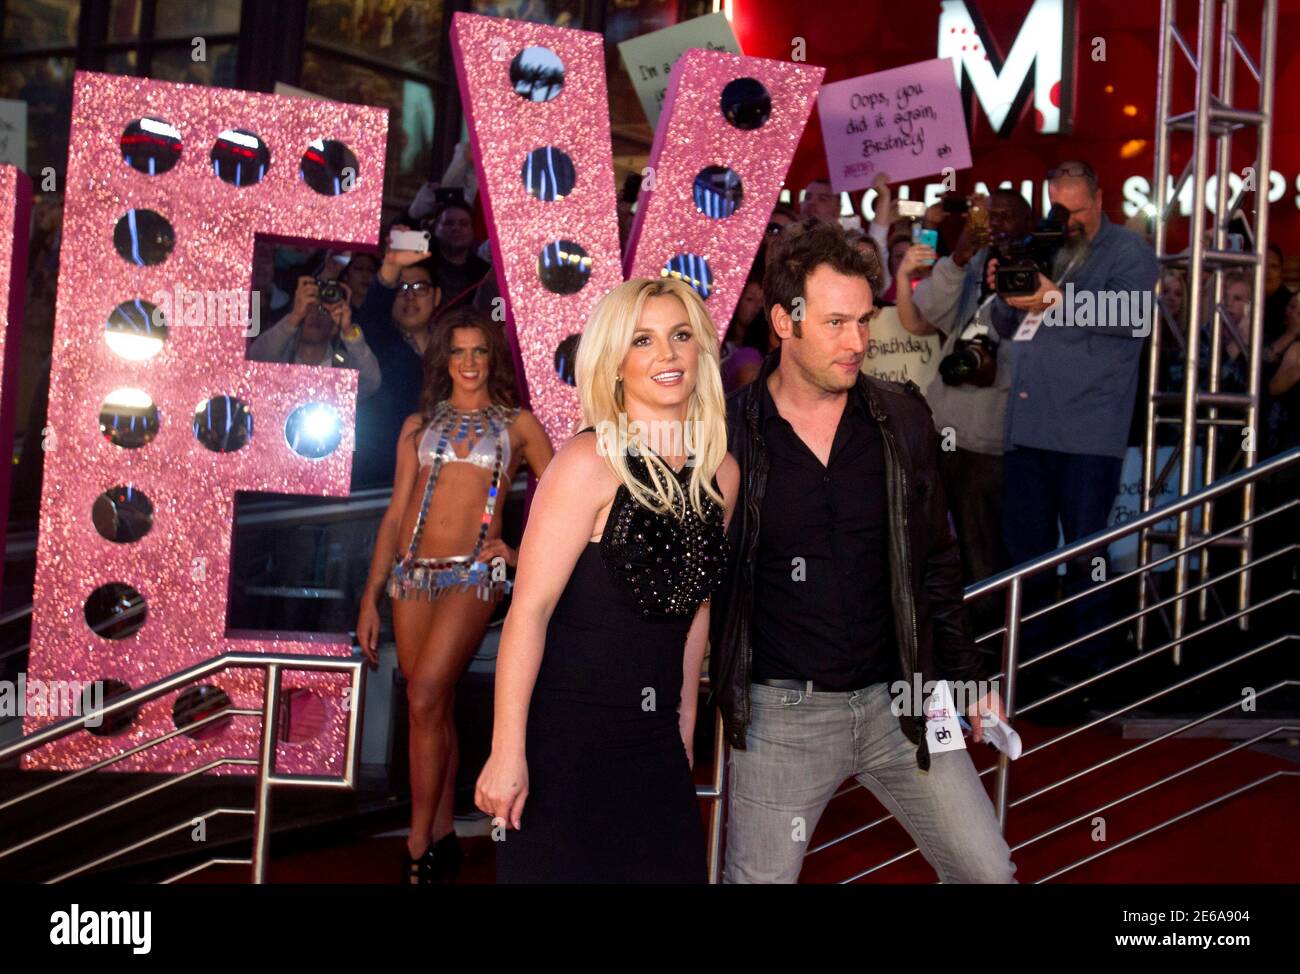 Pop singer Britney Spears (L) arrives at Planet Hollywood Resort and Casino  in Las Vegas, Nevada December 3, 2013. Spears is making preparations for  the debut of her two-year Las Vegas residency, "